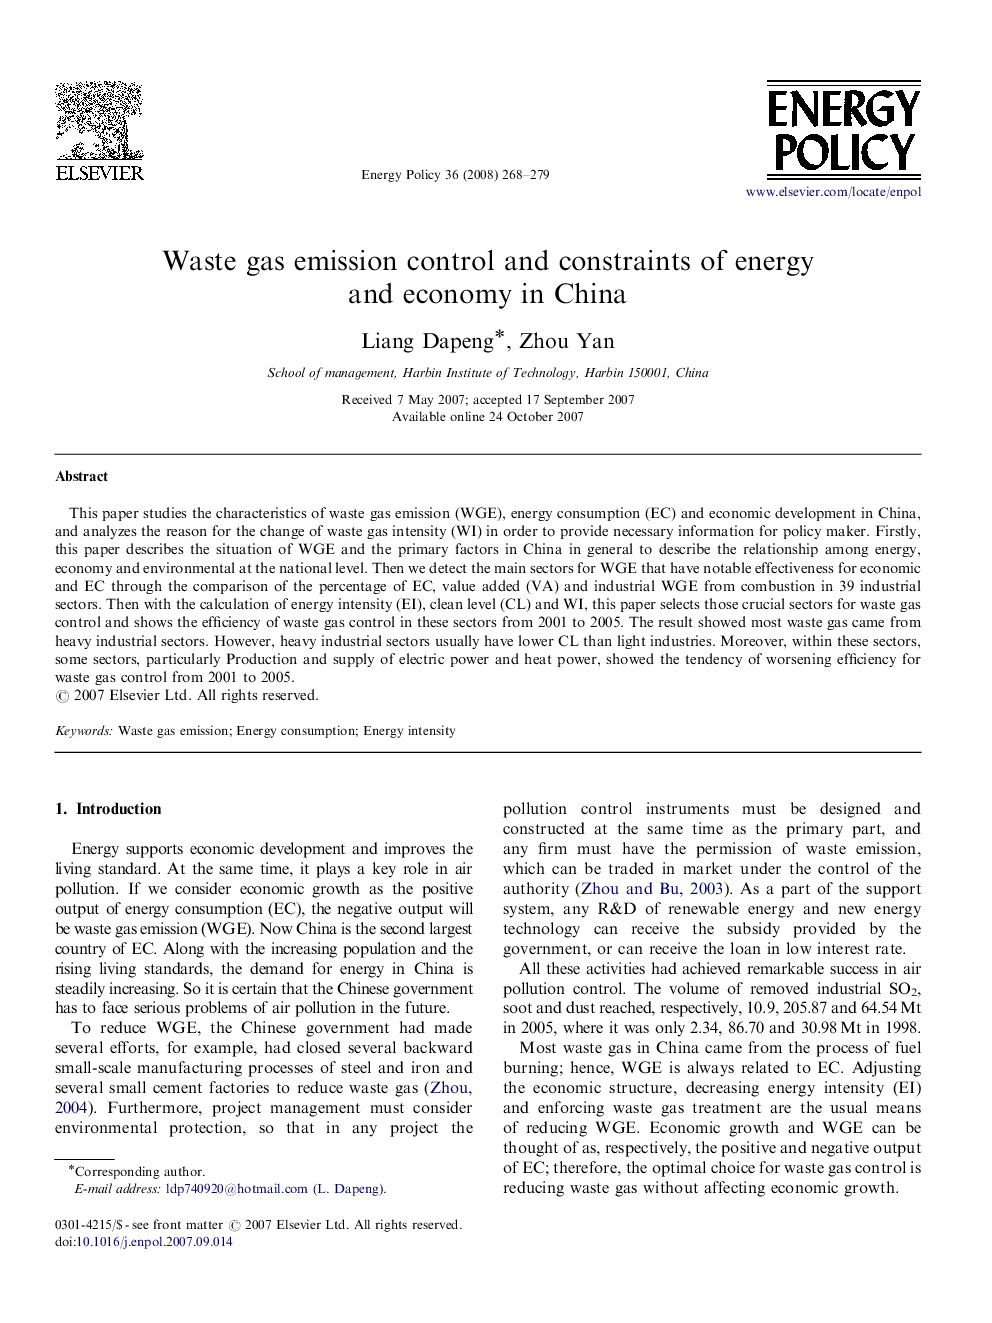 Waste gas emission control and constraints of energy and economy in China